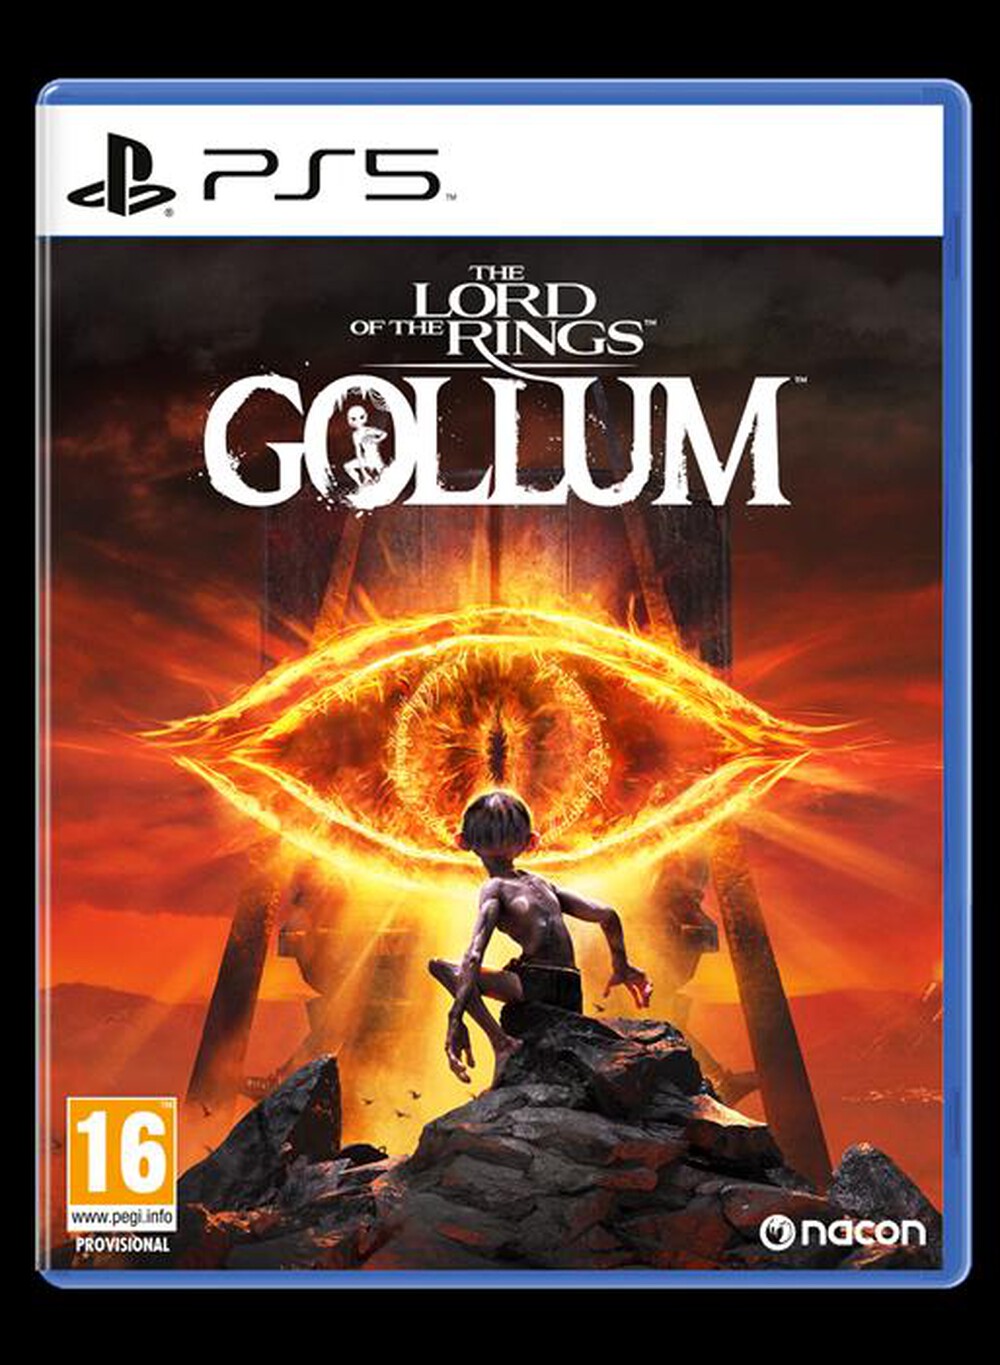 "NACON - THE LORD OF THE RINGS: GOLLUM PS5"